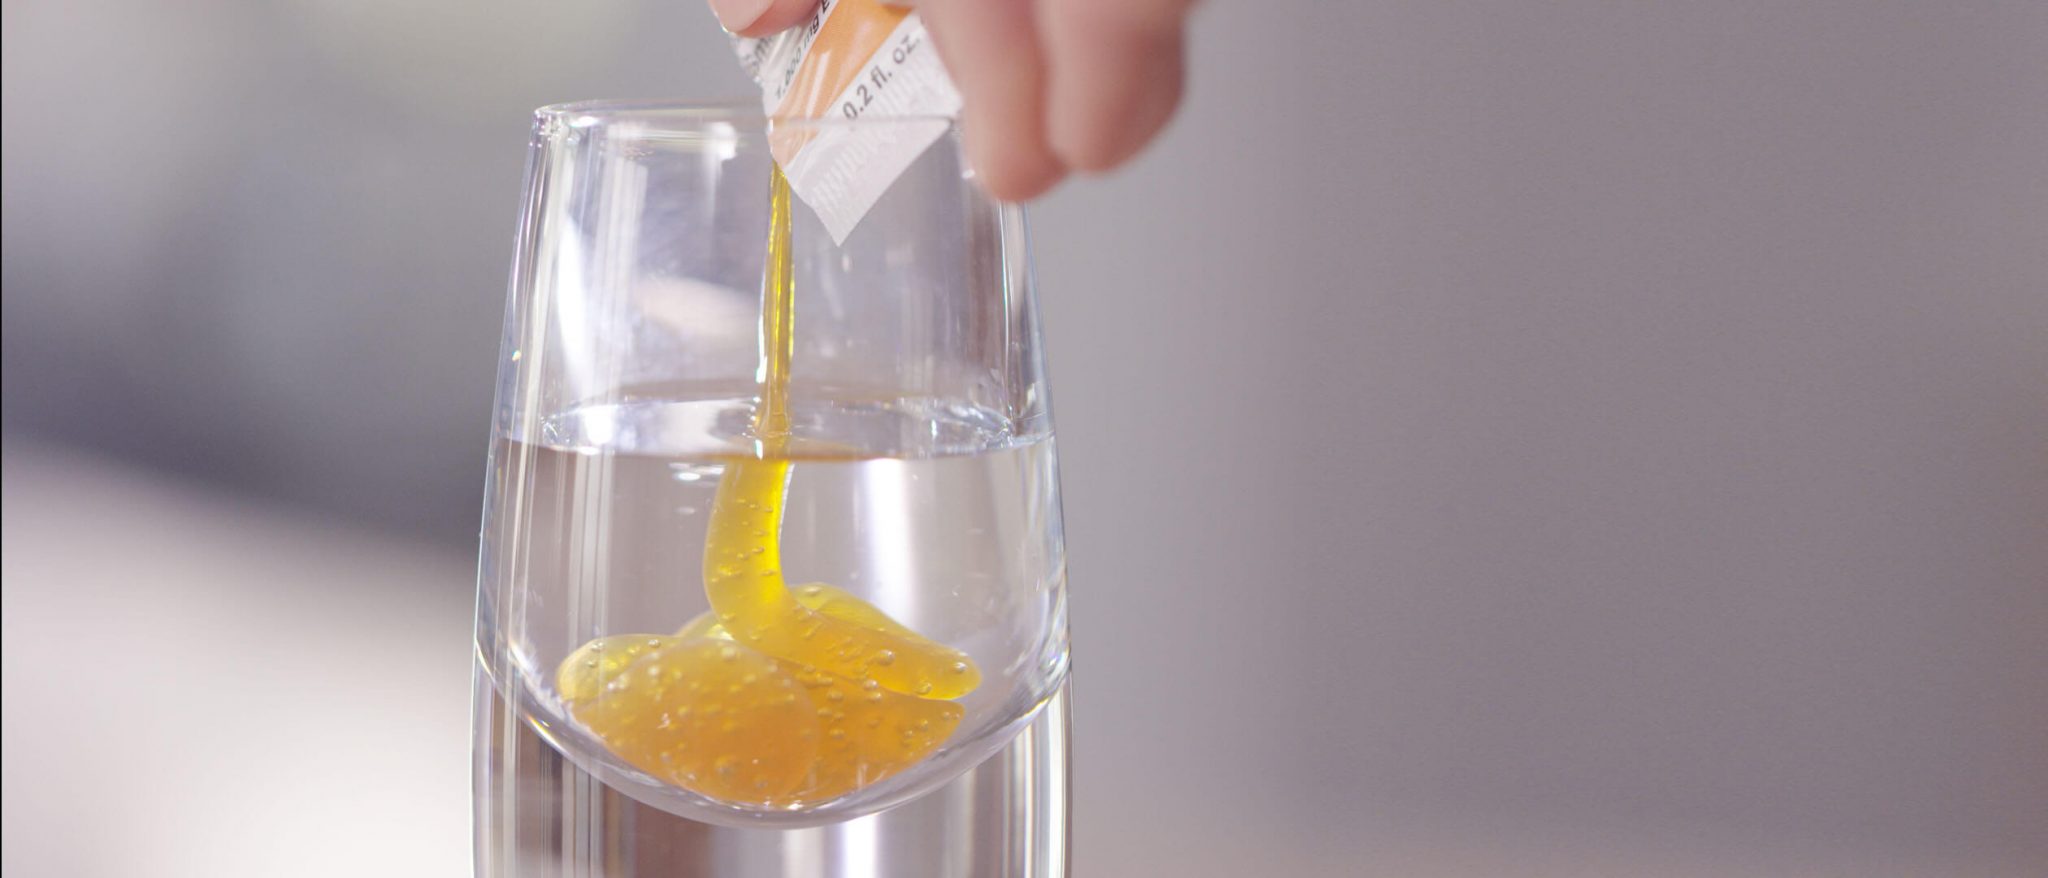 squeezing lypo-spheric vitamin c into a shot glass of water